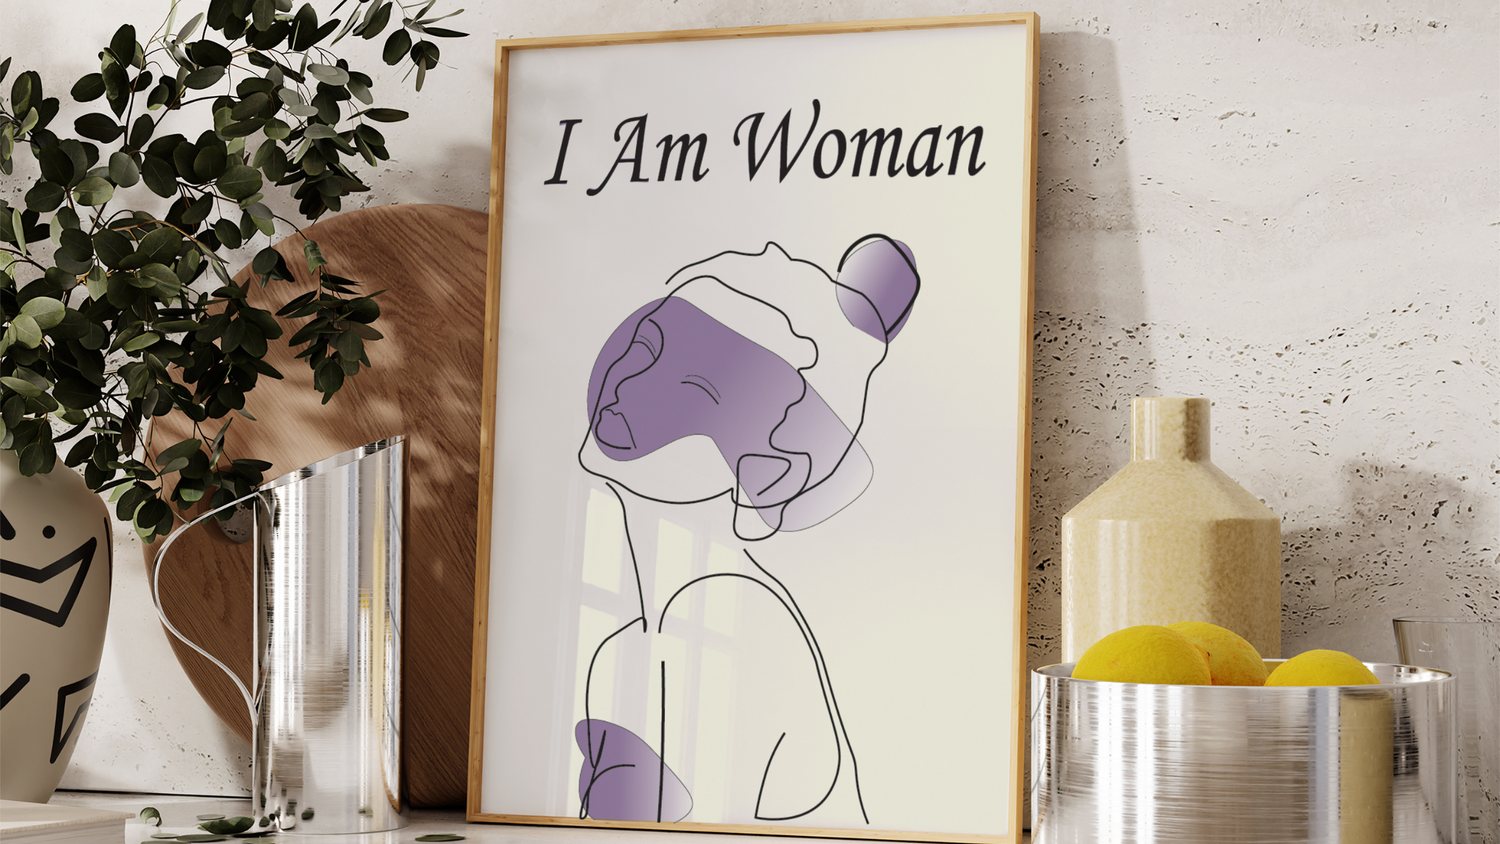 I am women wall art inspiration. Finding empowerment and inspiration for others.